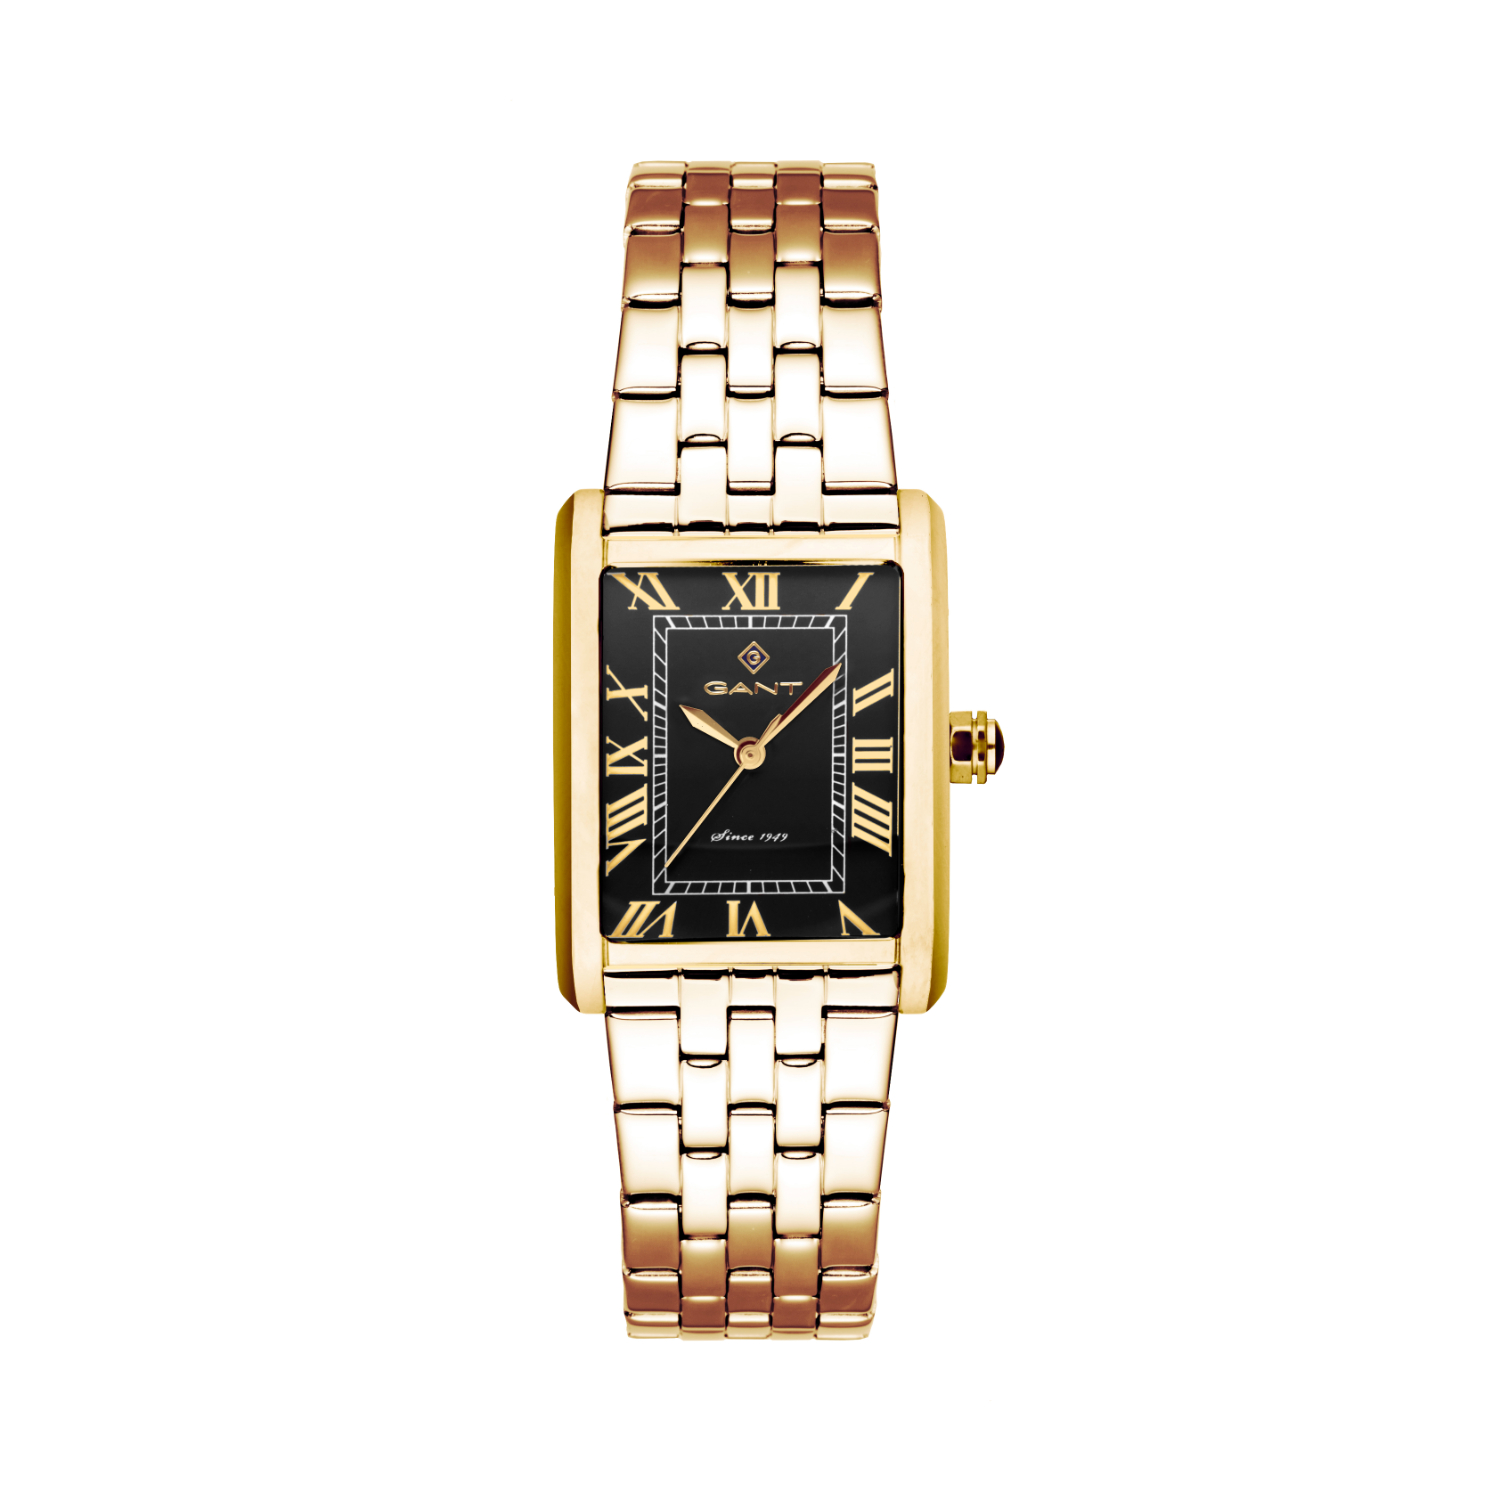 Womens Gant watch in gold stainless steel with black dial and bracelet.